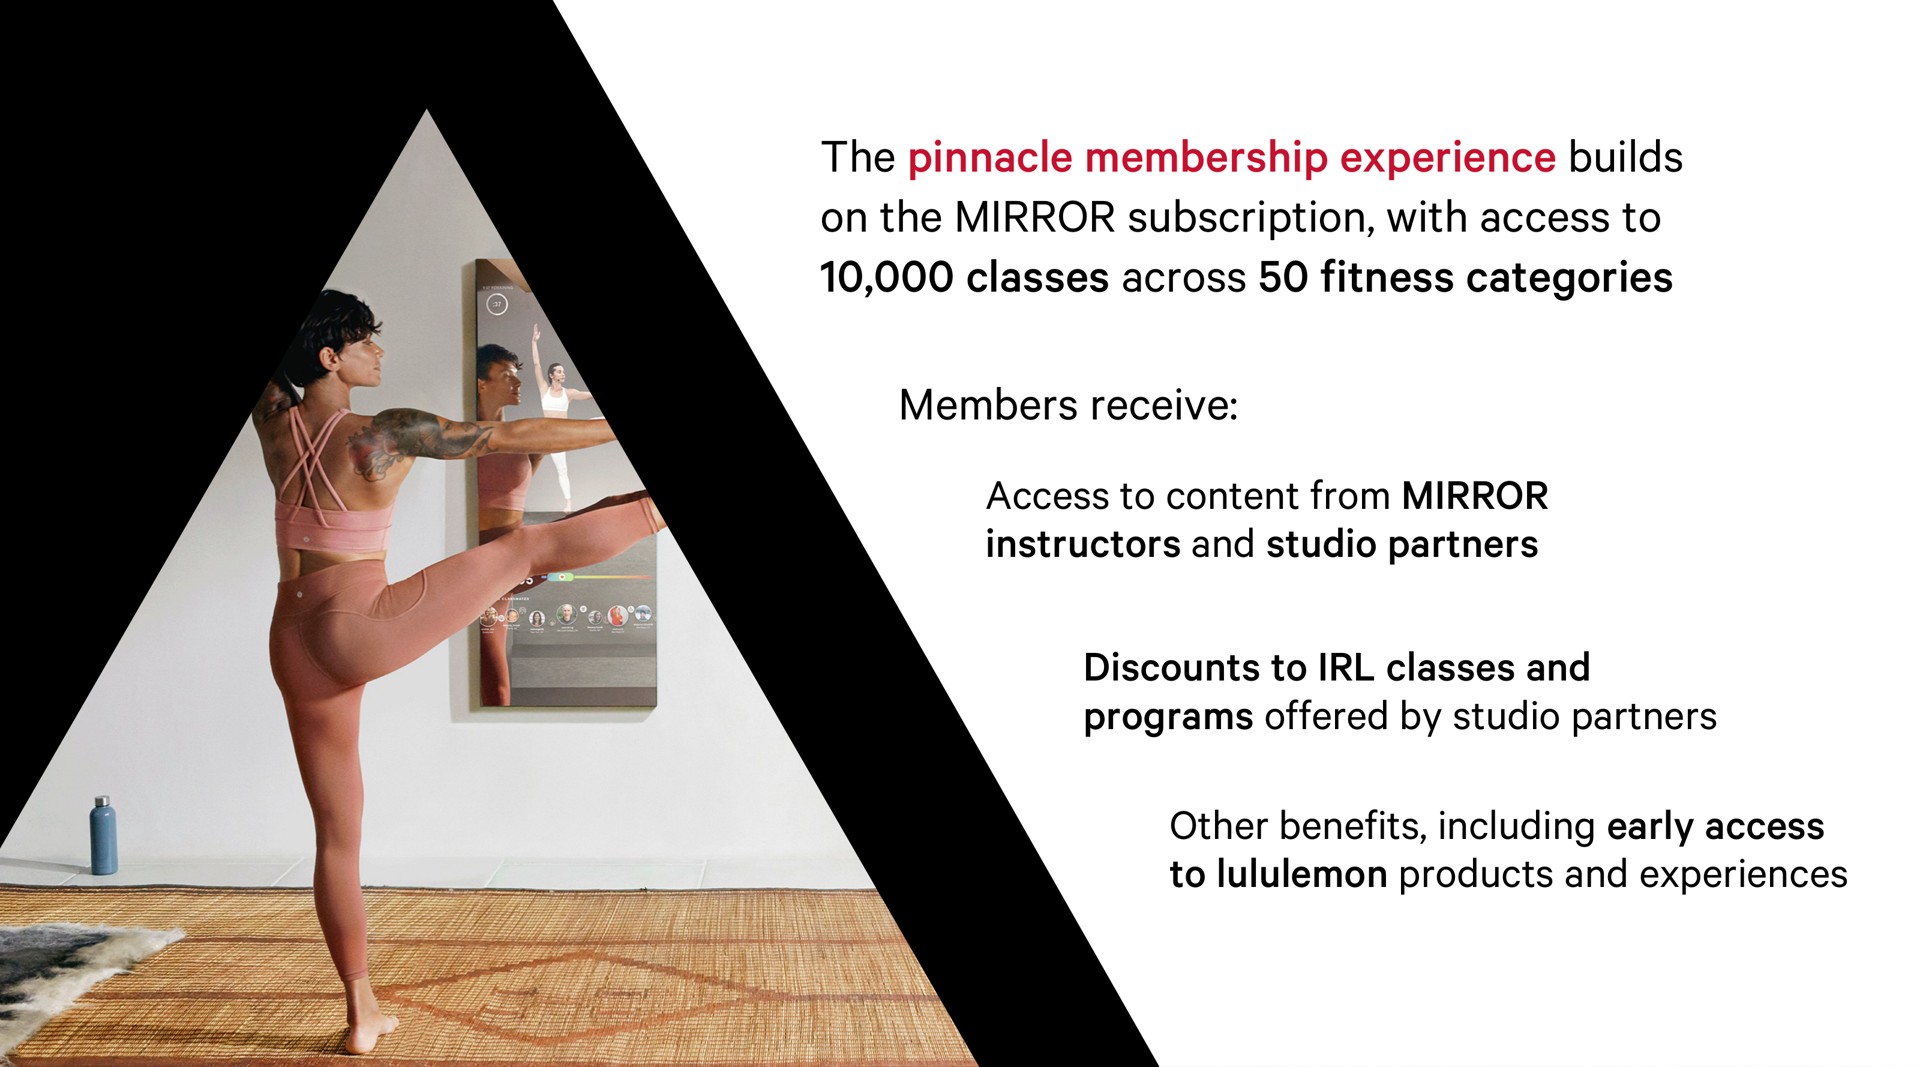 the pinnacle membership experience builds on the mirror subscription with access to classes across fitness categories members receive access to content from mirror instructors and studio partners discounts to classes and programs offered by studio partners other benefits including early access to products and experiences | Lululemon